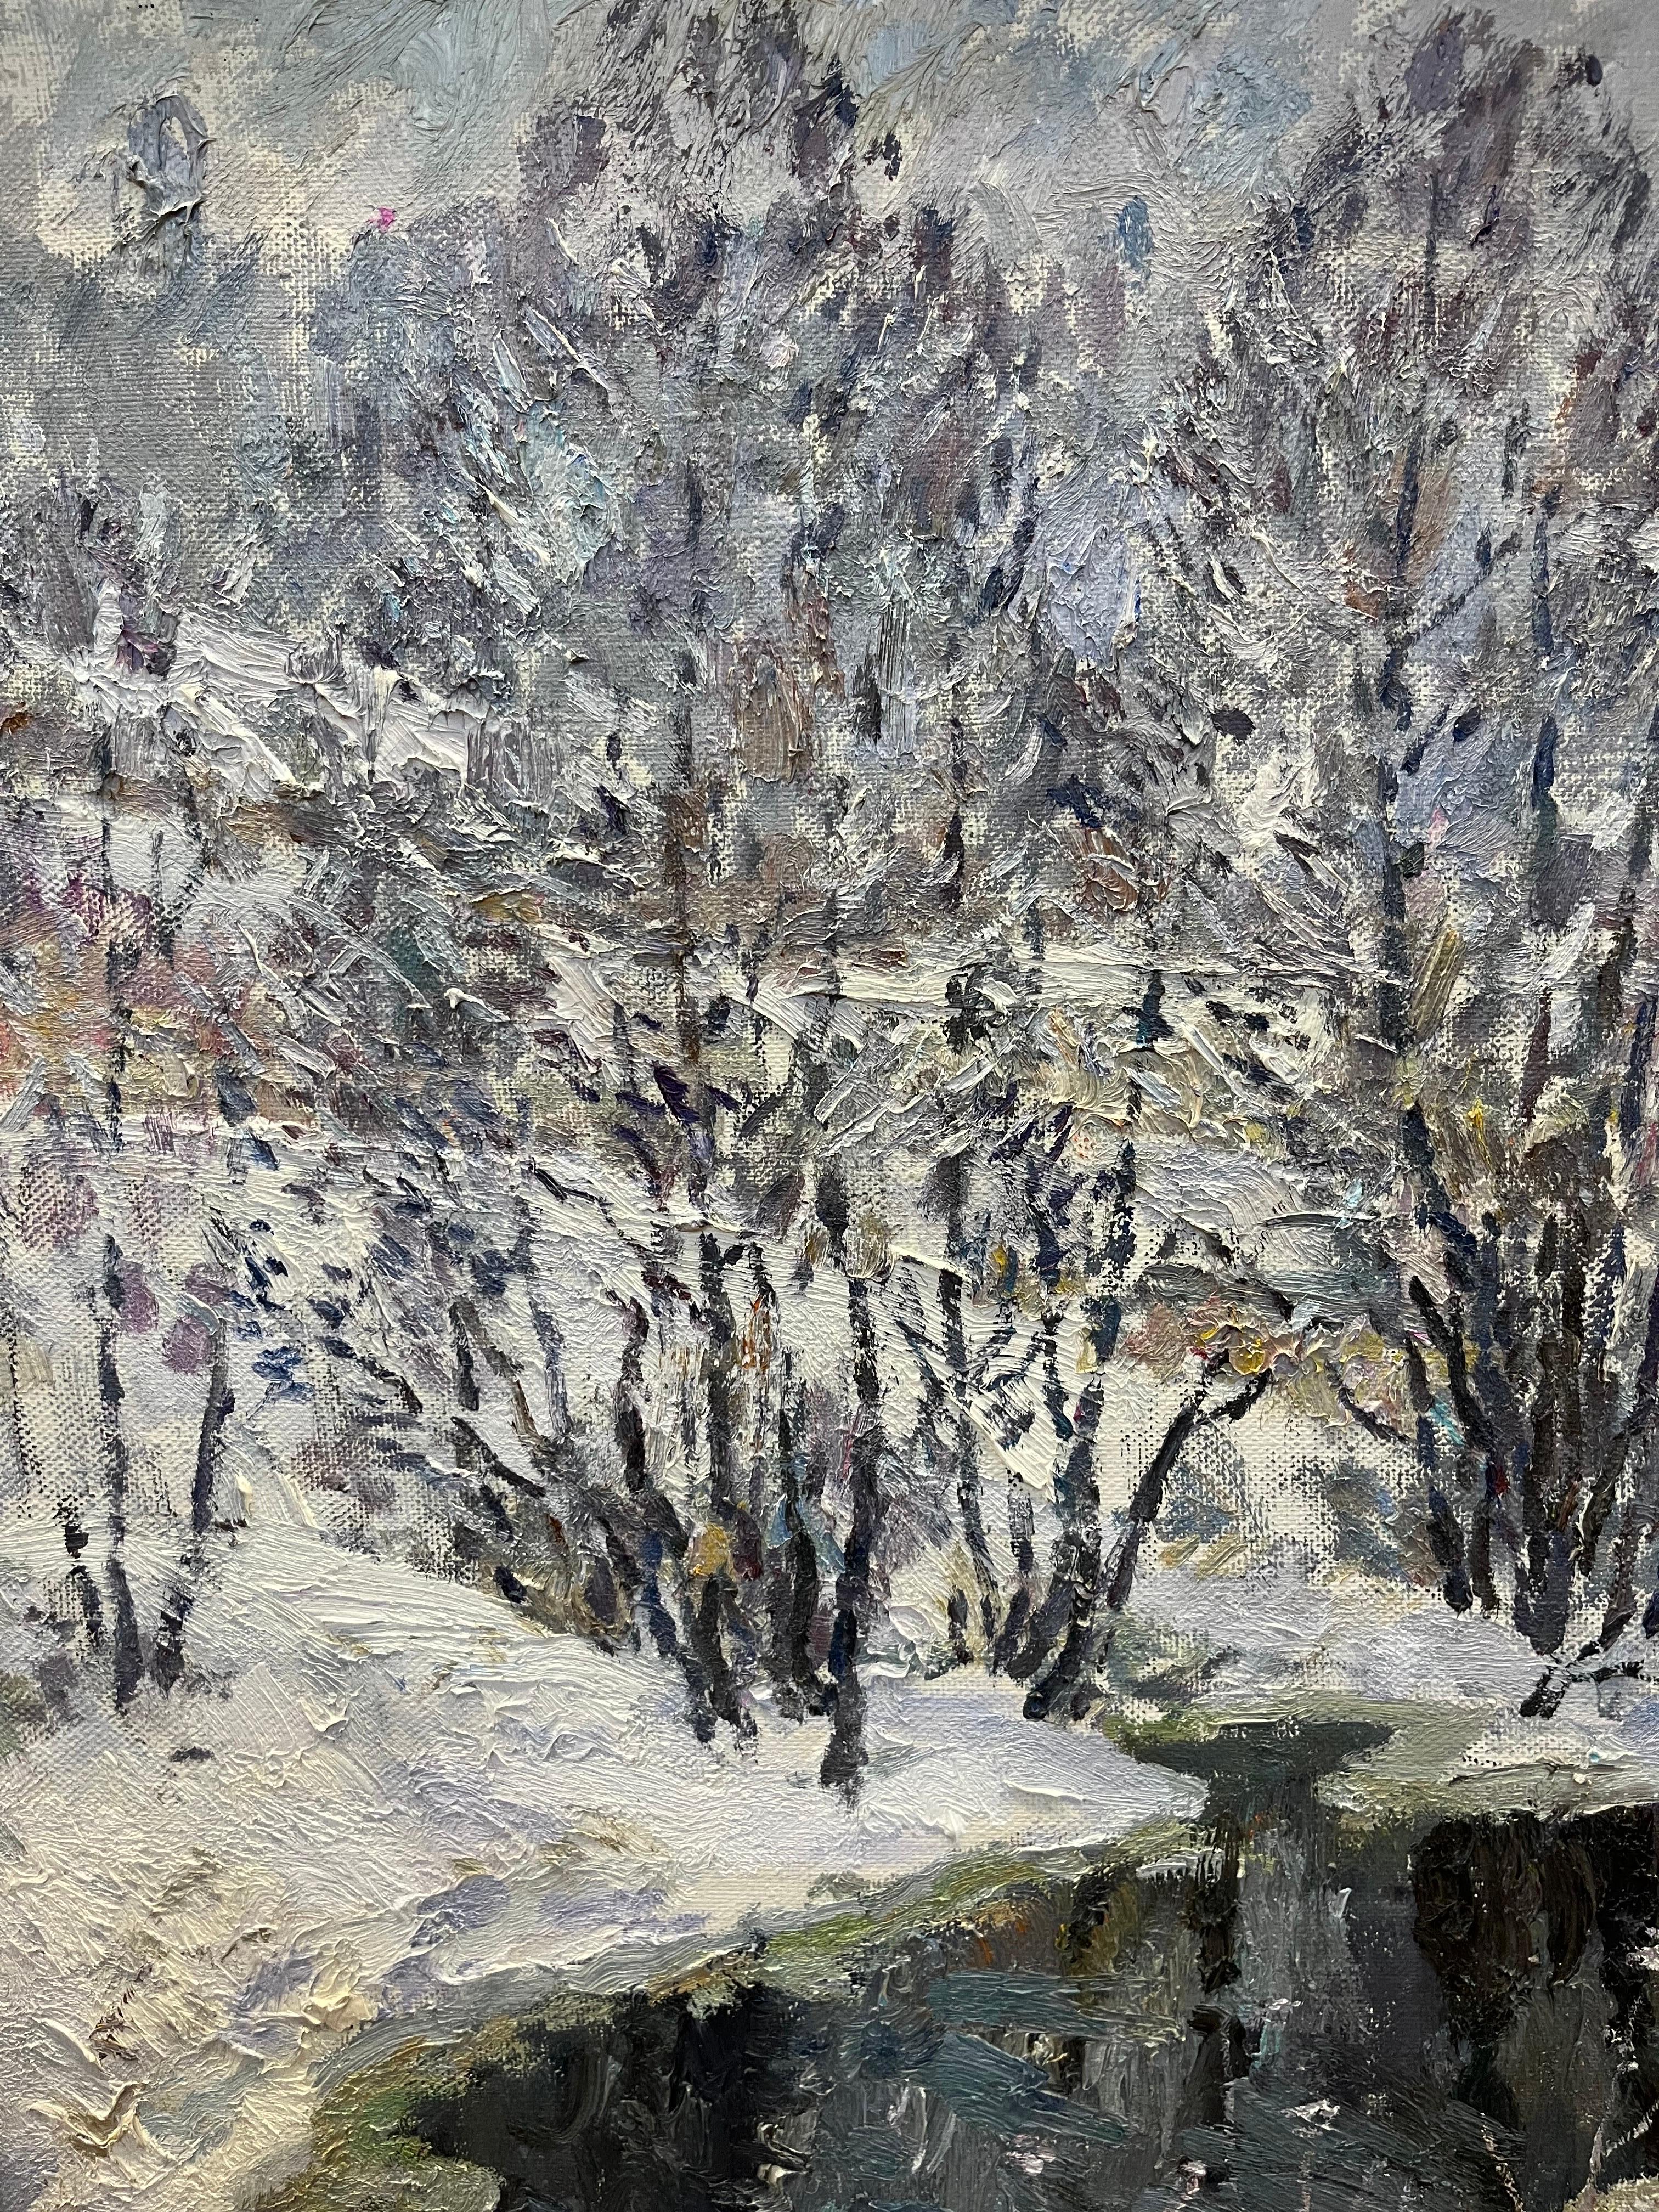 Snow, ,white, winter
Georgij MOROZ (Dneprodzerzinsk, Ucraina, 1937 - St. Petersburg, 2015)

1937: he was born in Dneprodzerzinsk, Ucraina.
1949-56: he began artistic studies in Dneprodzerzinsk and later he attended the School of Fine Arts in